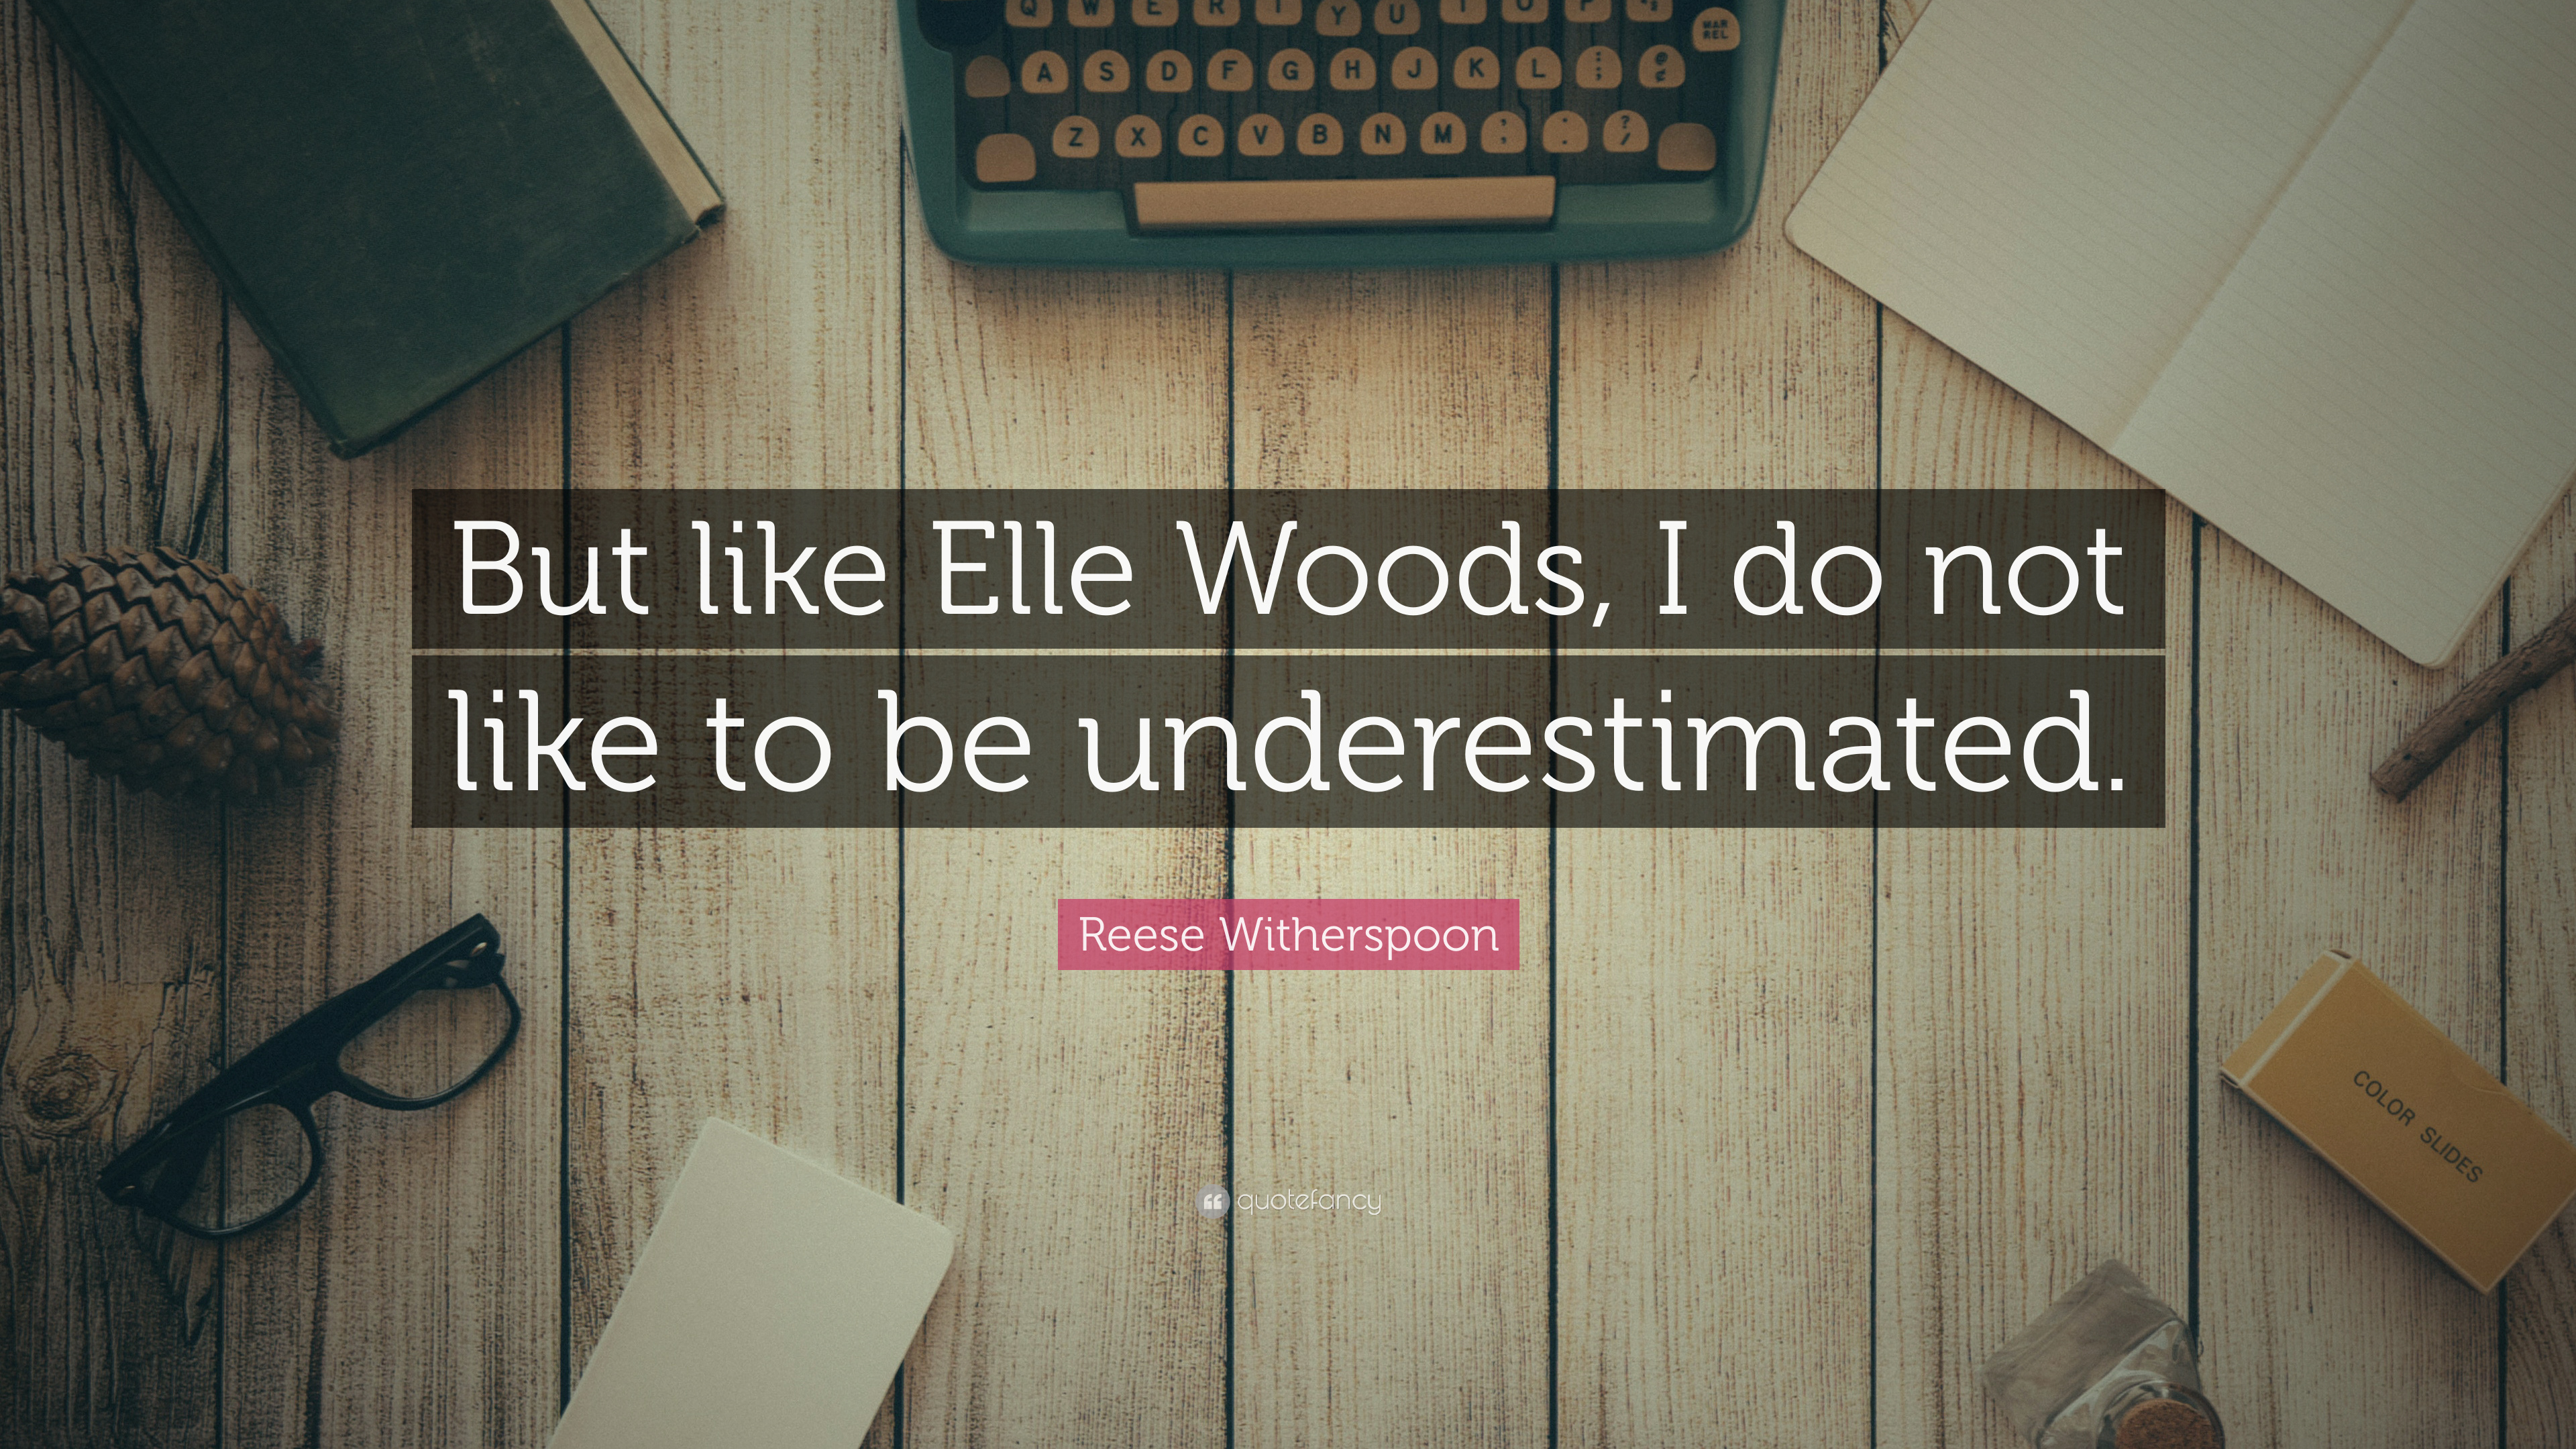 Reese Witherspoon Quote - Inspirational Henri Matisse Quotes - HD Wallpaper 